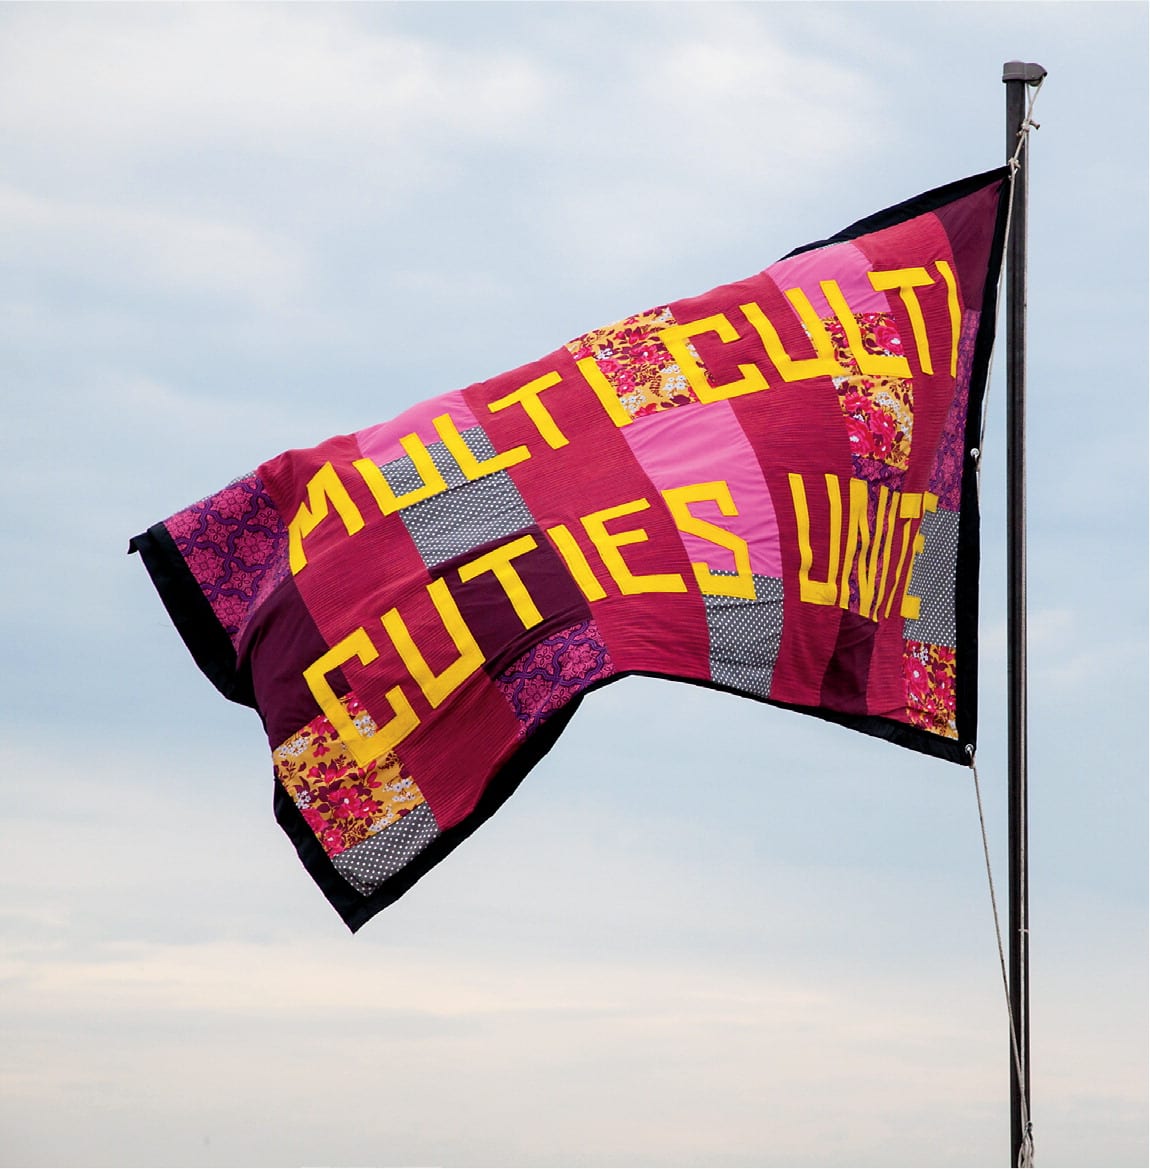 A flag made up of patchwork squares in various shades of hot pink, burgundy, and various patterns flies from a flagpole. Bold yellow text on the flag reads "Multi Culti Cuties Unite."